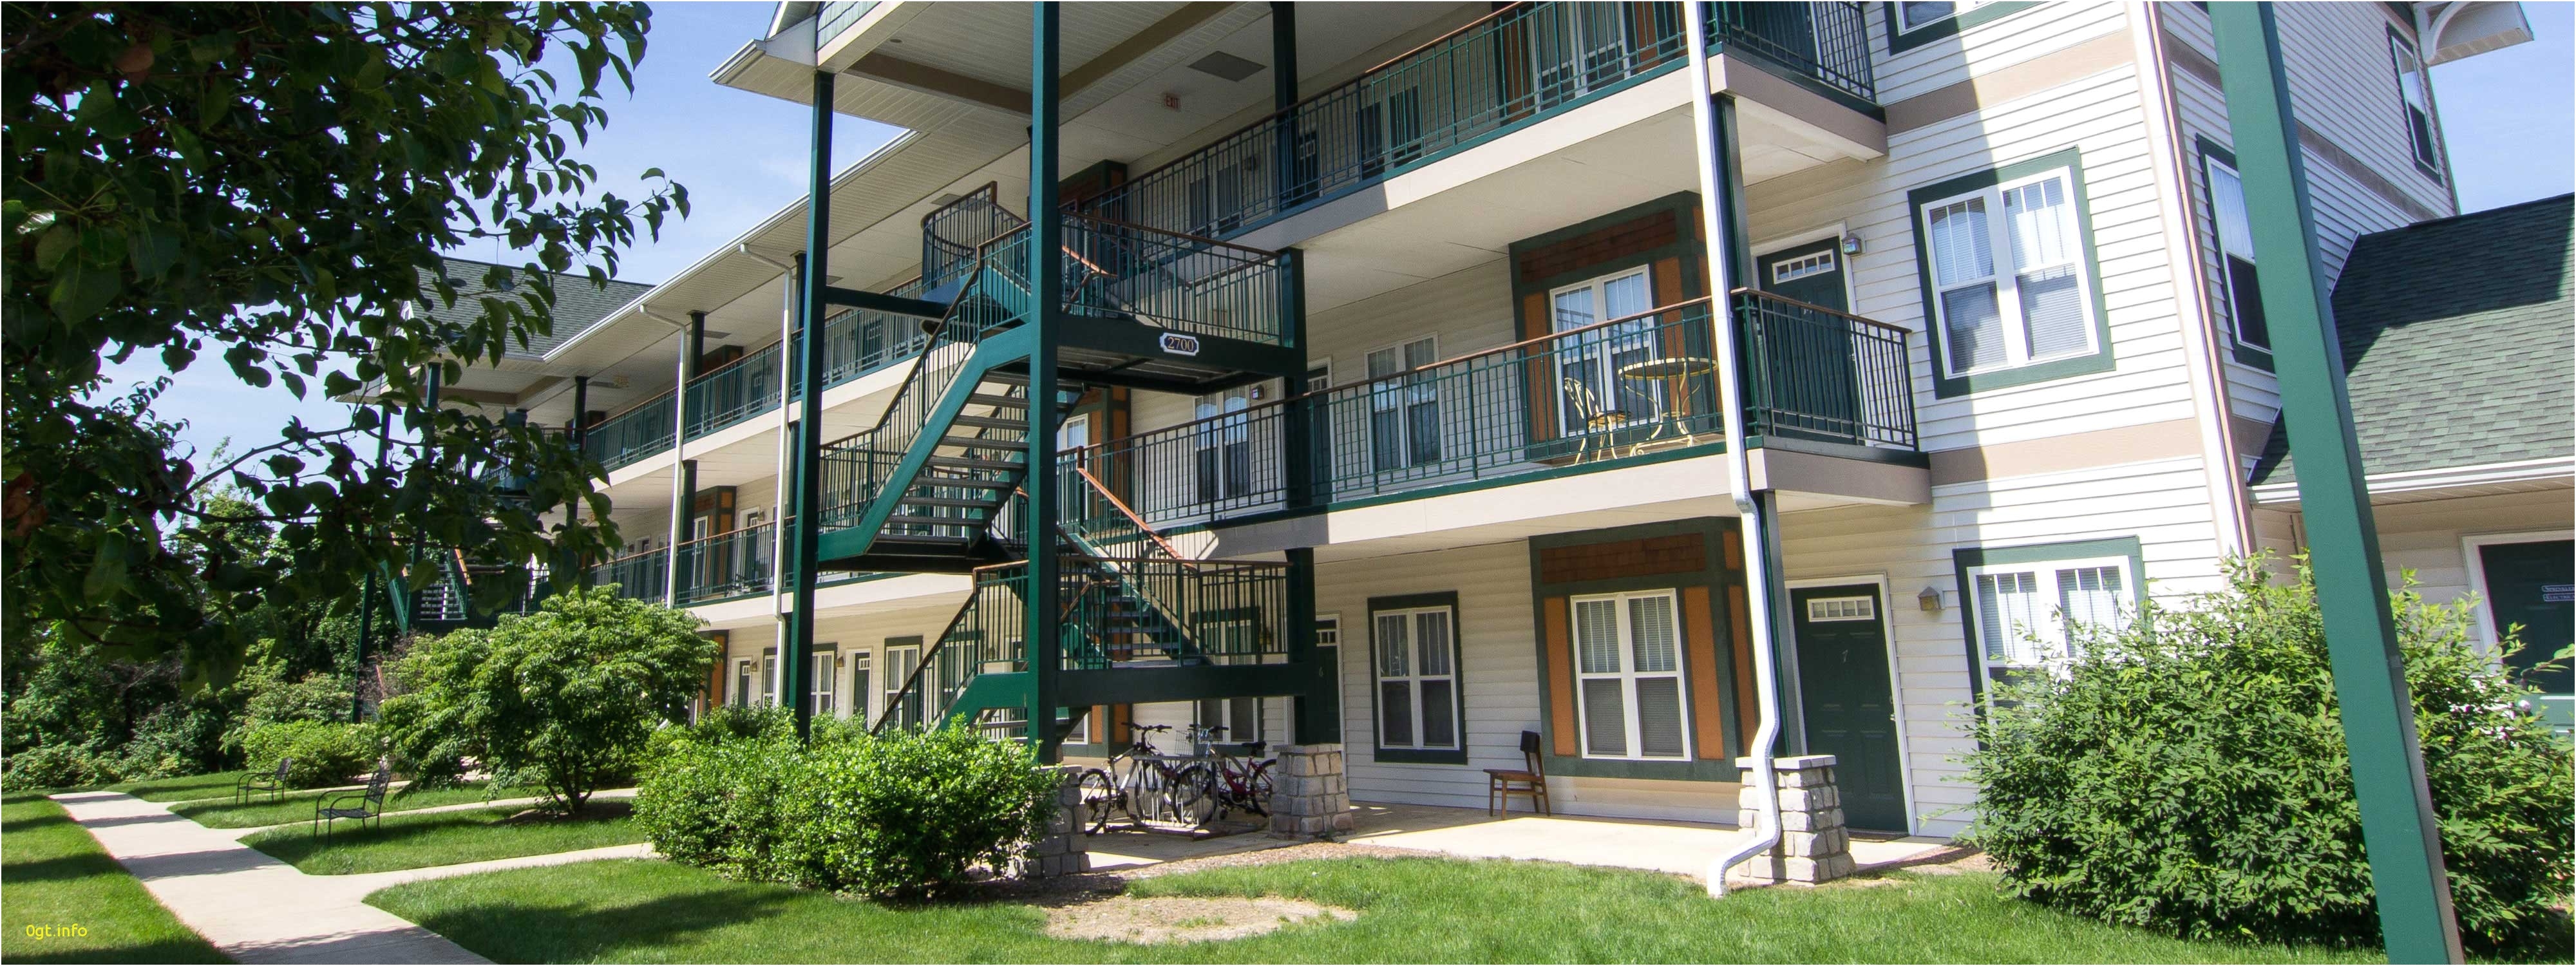 1 bedroom apartments columbia mo best of 4 bedroom apartments for rent free line home decor